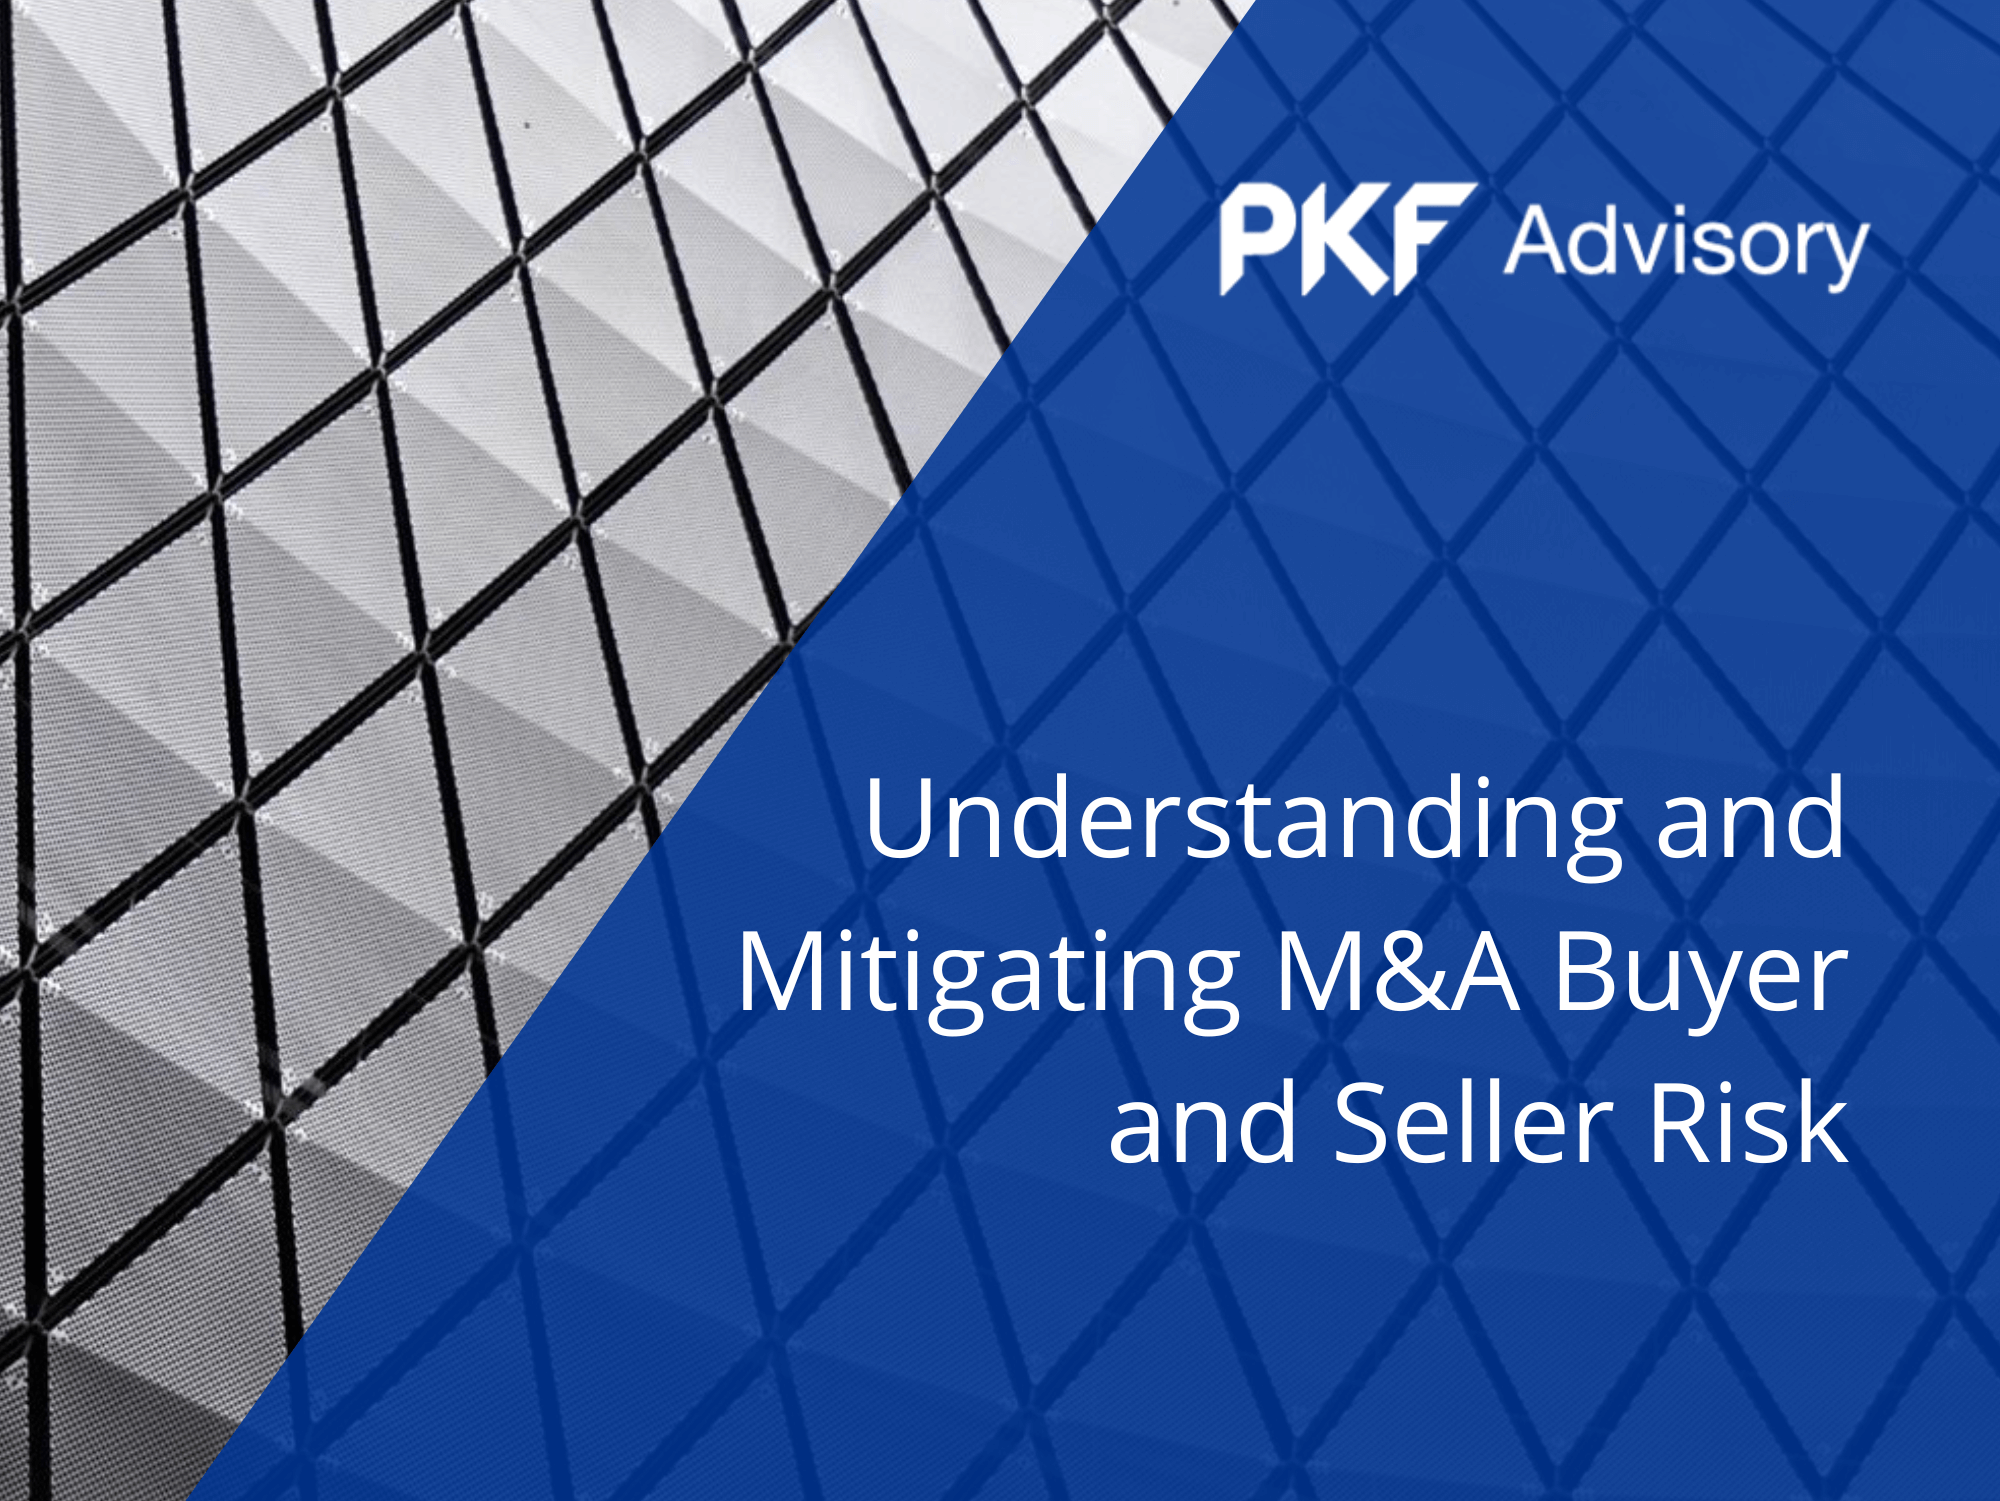 Understanding and Mitigating M&A Buyer and Seller Risk